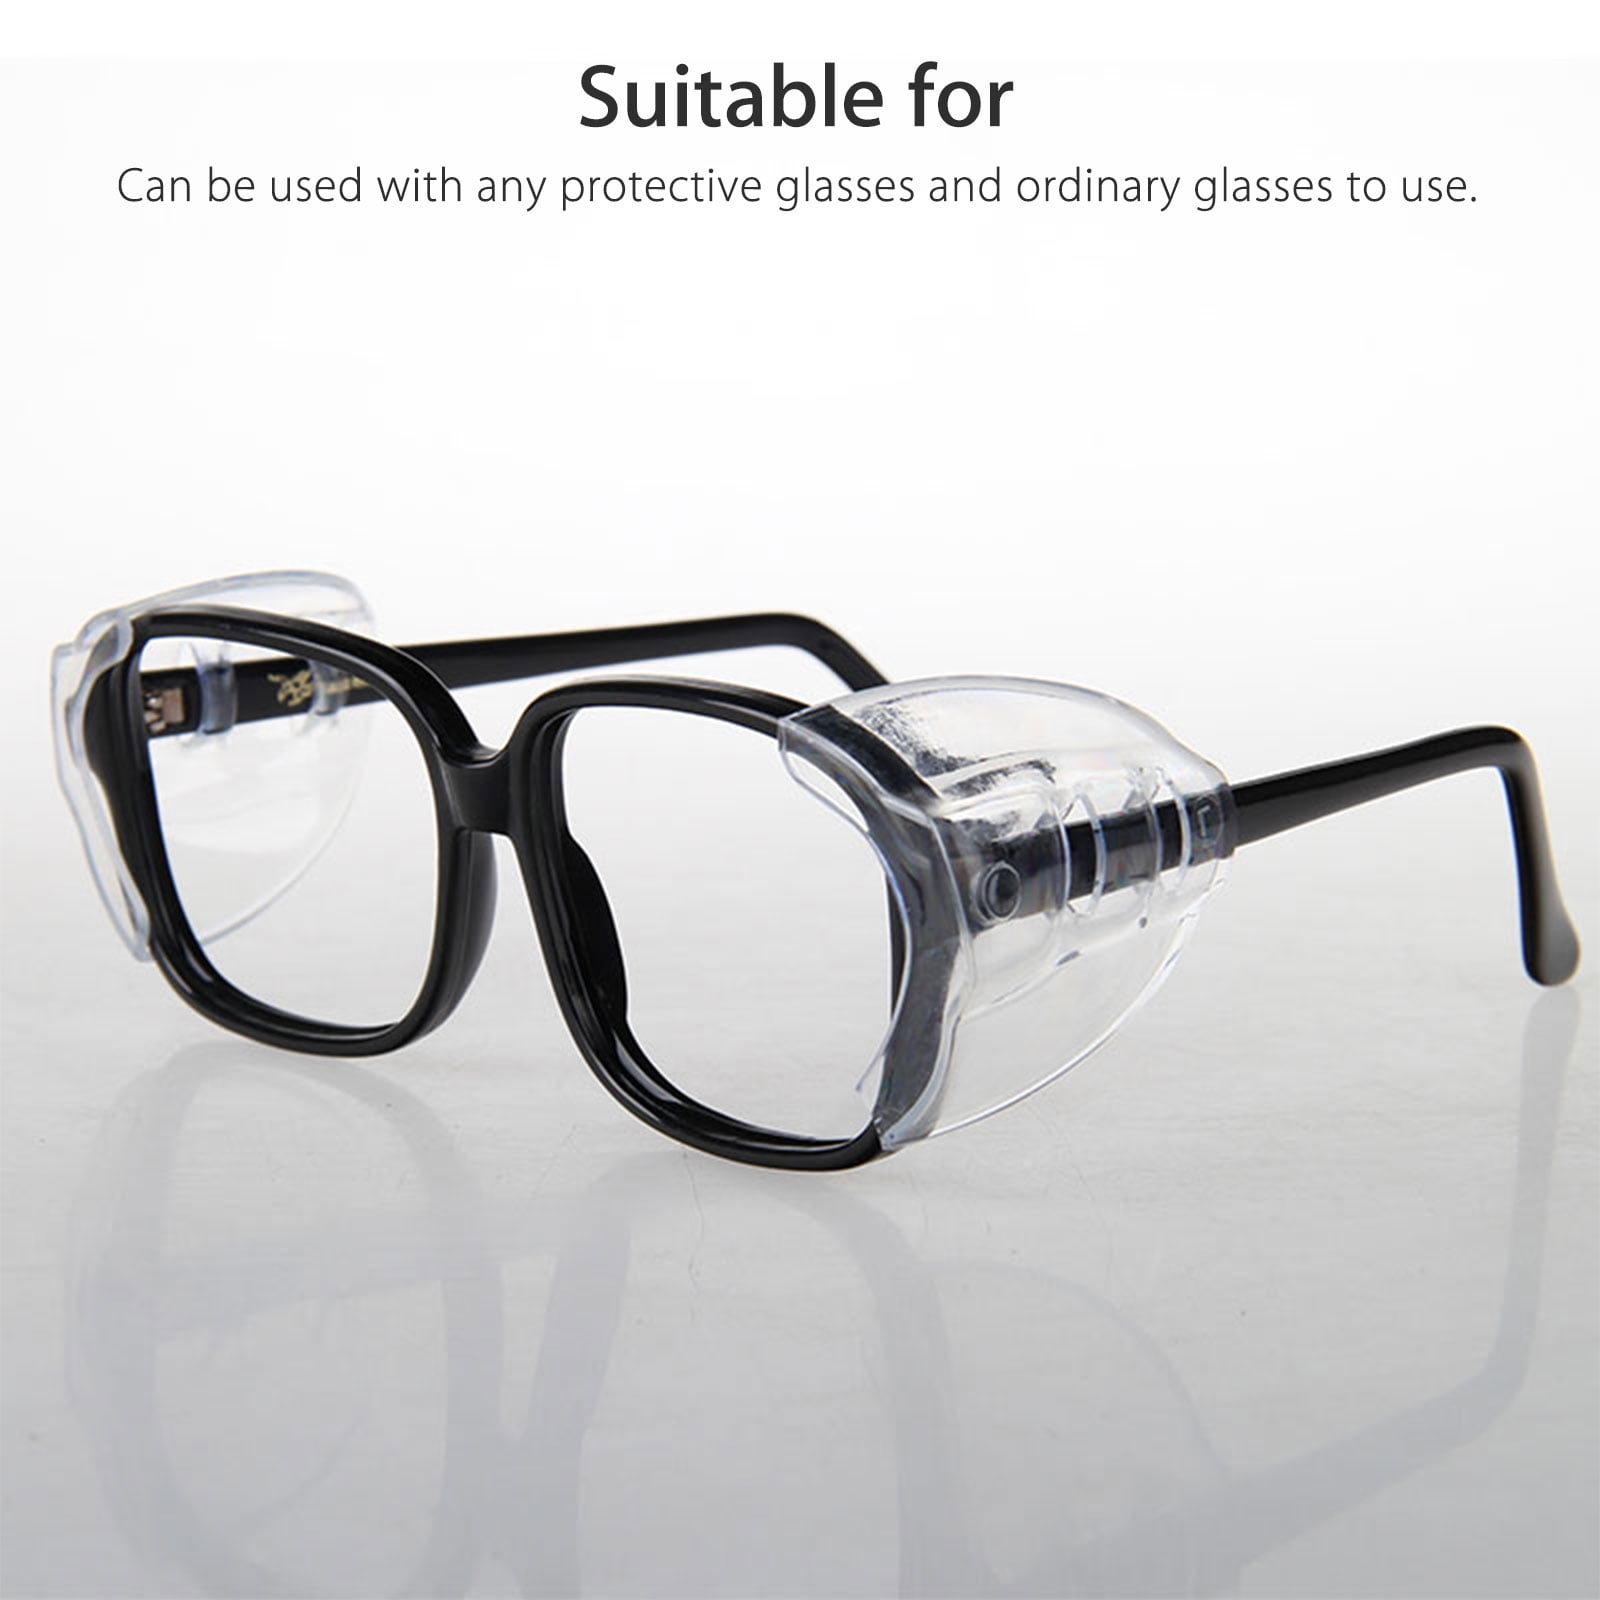 2pcs Clear Side Shields Universal Fit Flexible For Eye Glasses Safety Glasses US 